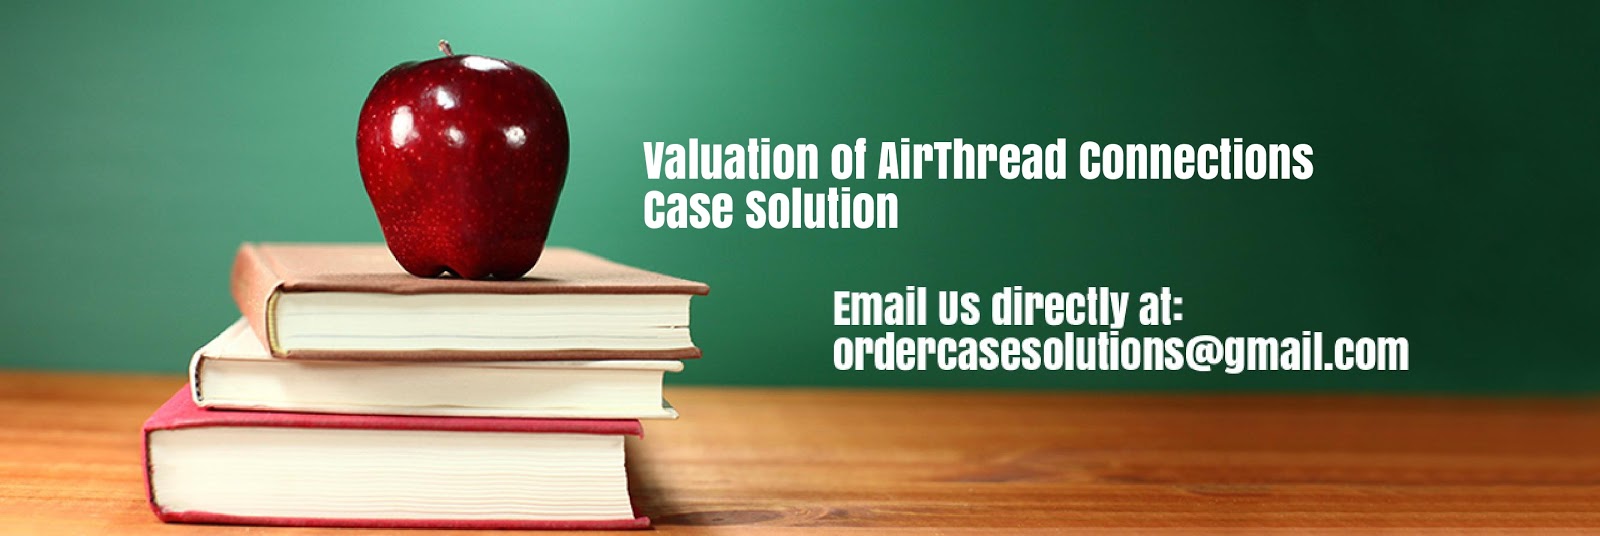 Valuation of AirThread Connections Case Study Analysis & Solution